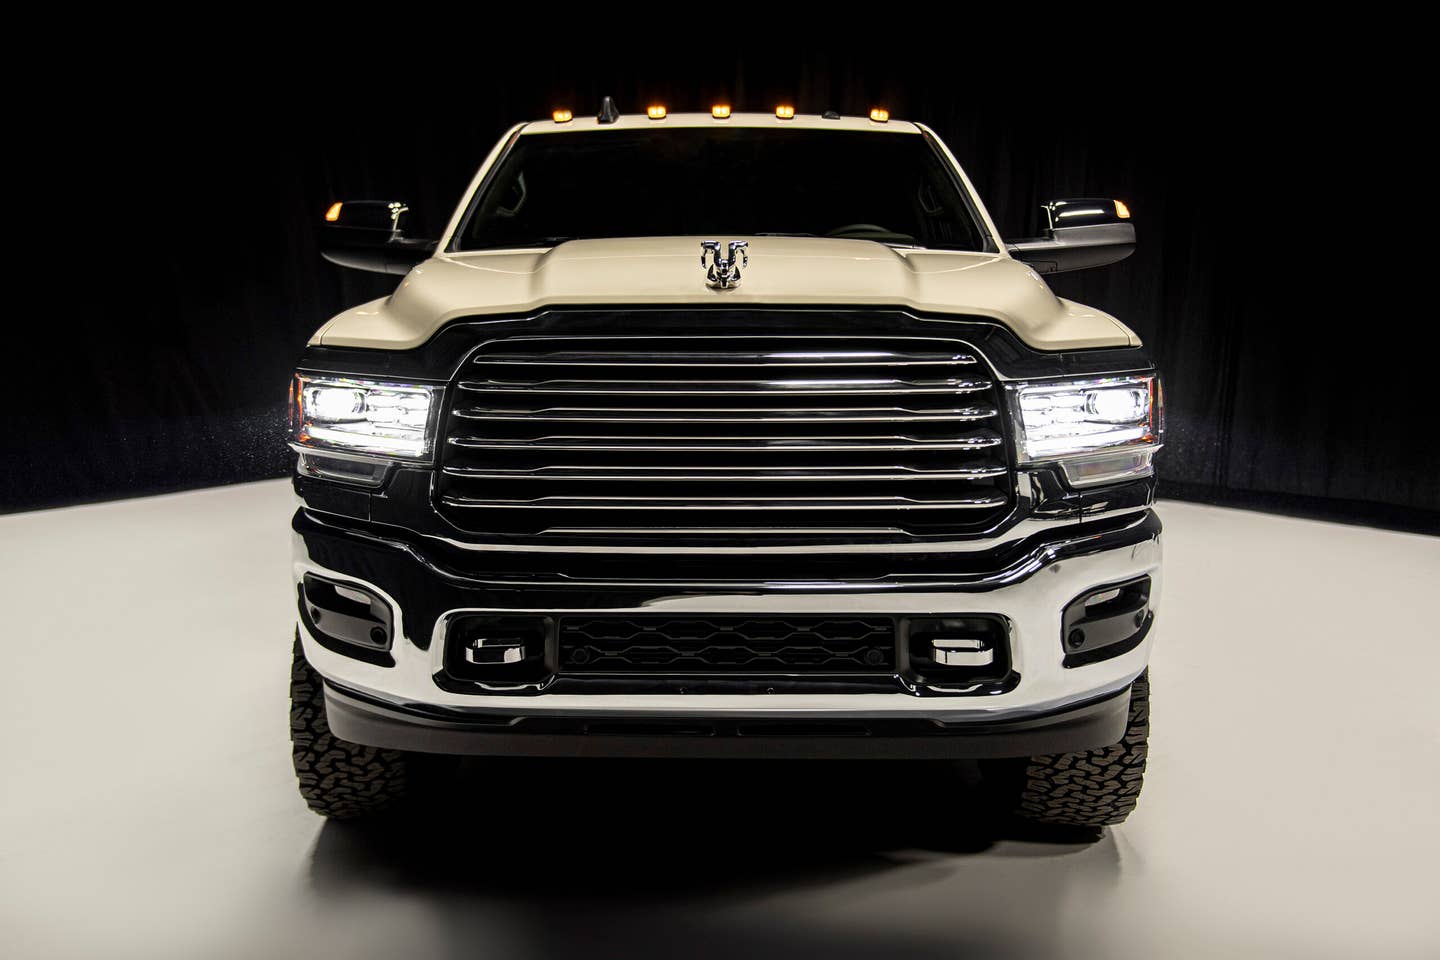 The Ram Truck brand and Chris Stapleton create one-of-a-kind Ram “Traveller” truck designed by the eight-time Grammy-winning artist in collaboration with the Ram Truck design team